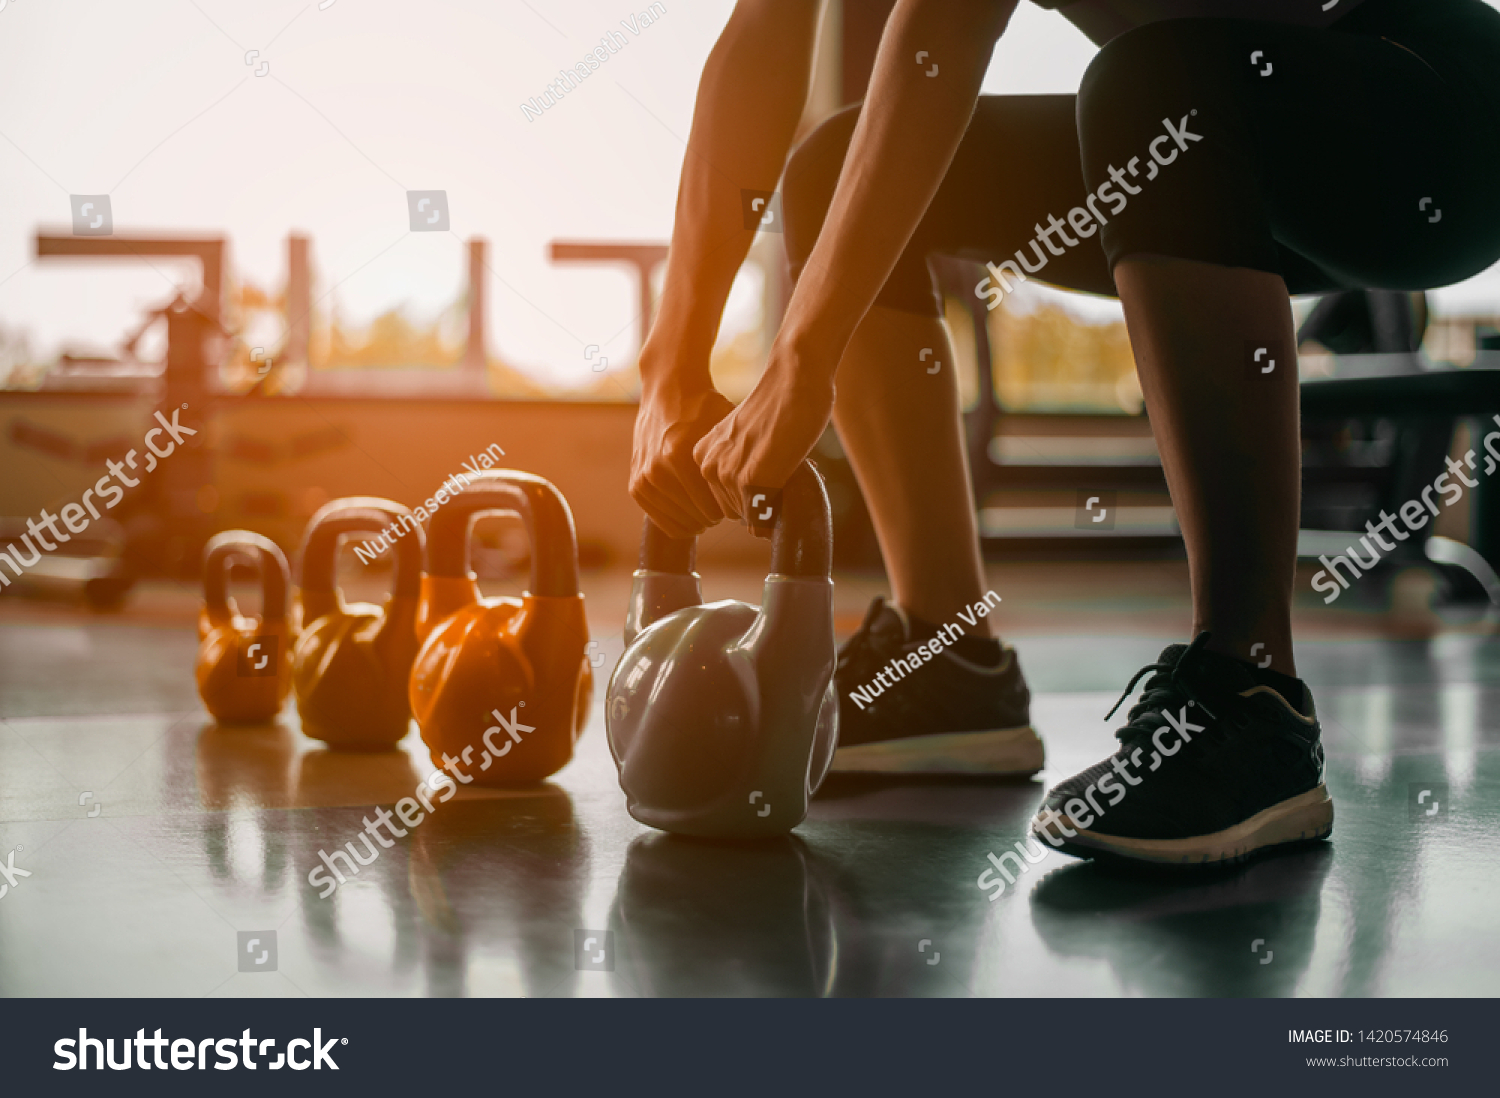 fitness ,workout, gym exercise ,lifestyle  and healthy concept.Woman in exercise gear standing in a row holding dumbbells during an exercise class at the gym.Fitness training with kettlebell in sport  #1420574846